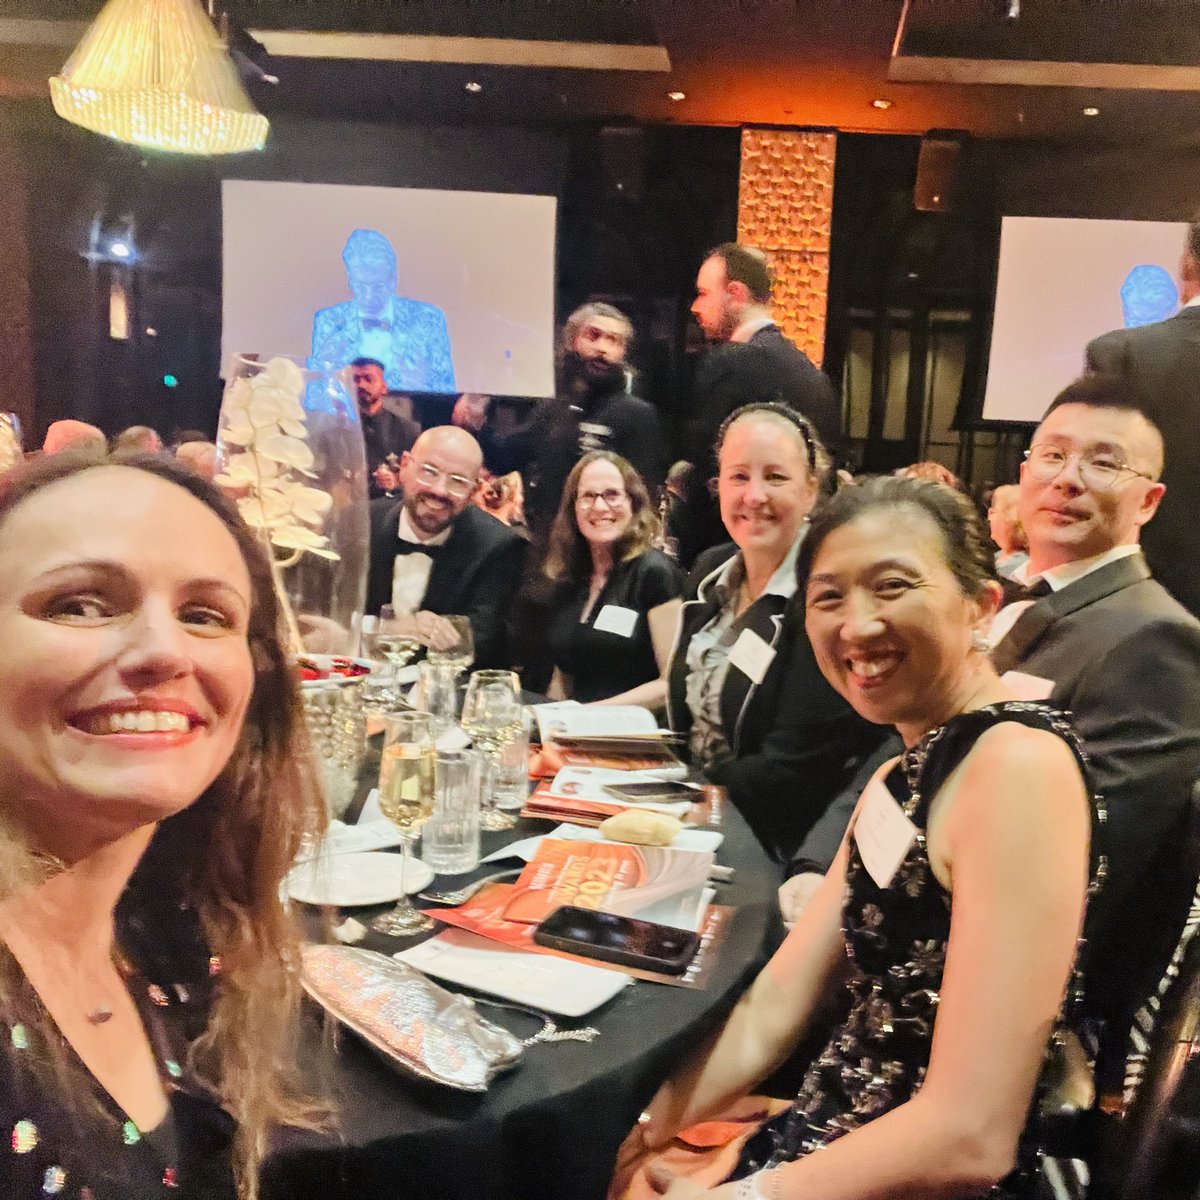 Lucky to be sitting with such stars from the Faculty of Medicine and Health University of Sydney at Research Australia Awards ⭐️ #resausawards @WARC_USYD @clara_chow @JRedHeart @van__Oijen @CathieSherr @syd_health